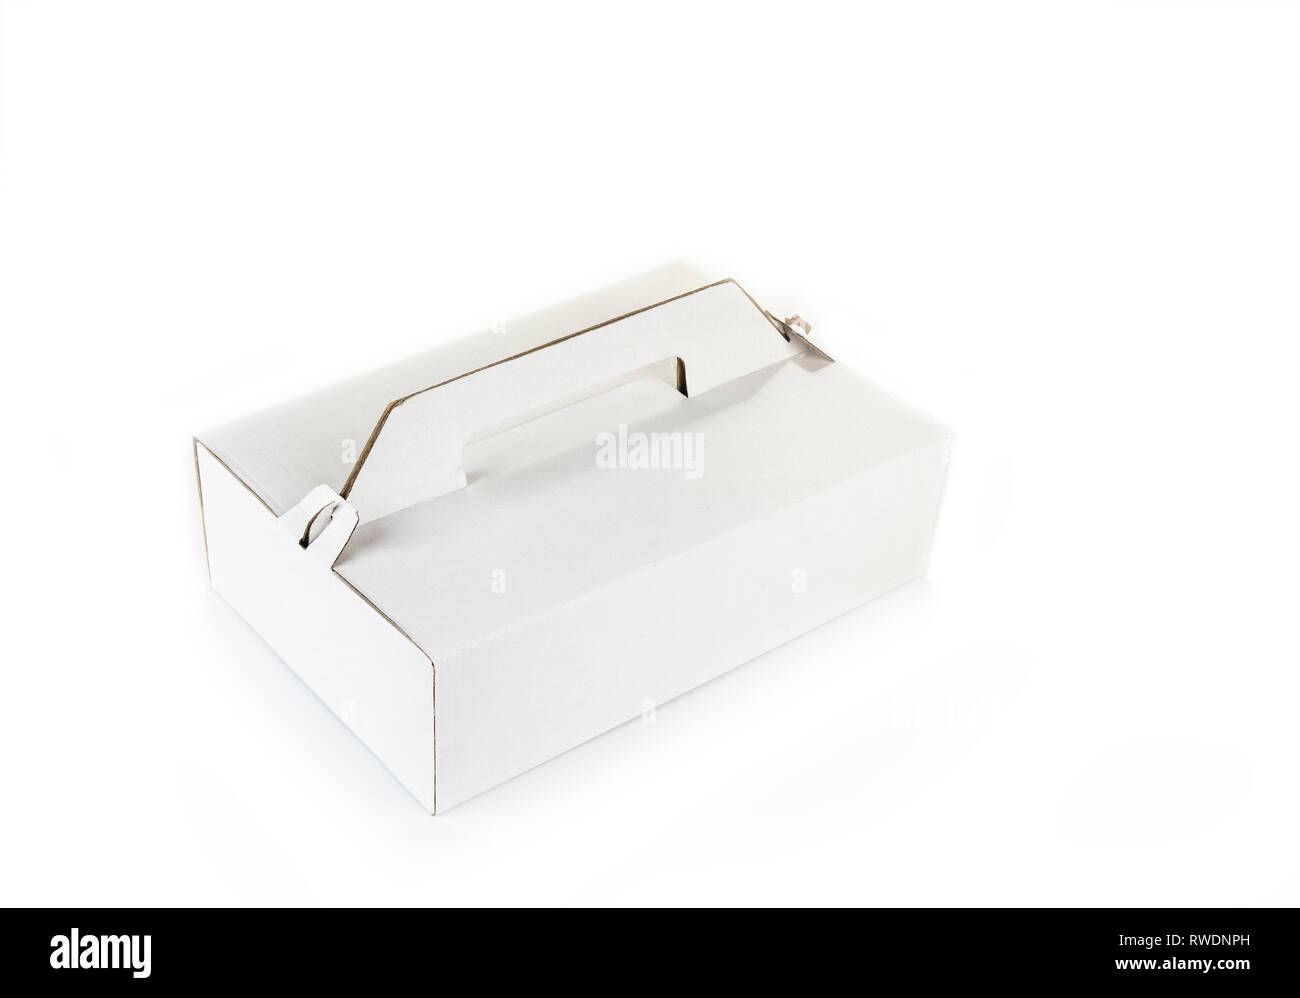 Folded cardboard box for a cake or takeaway food Stock Photo